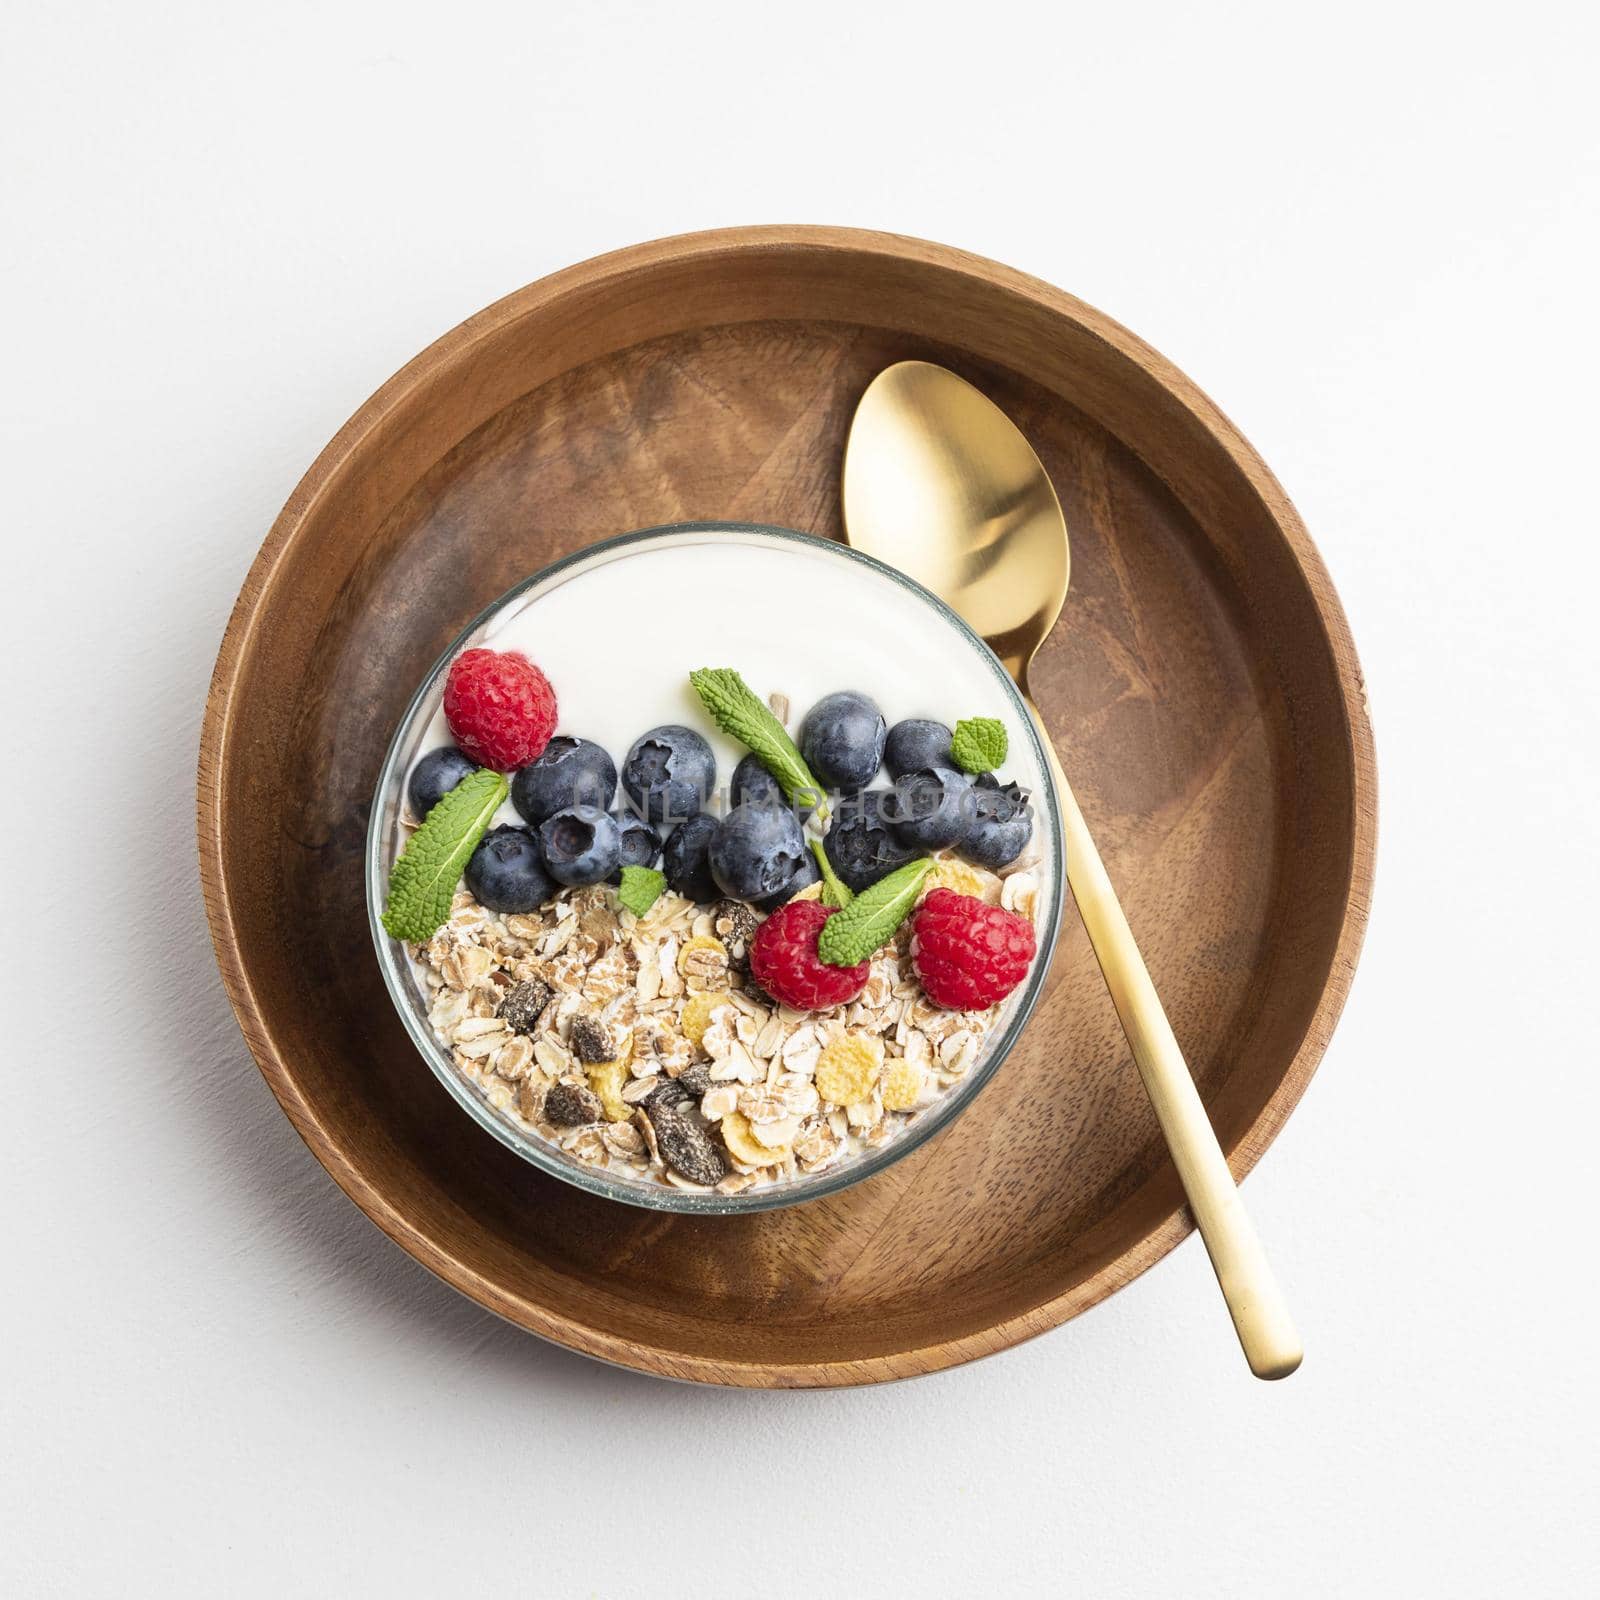 top view oatmeal bowl with raspberries blueberries2. Resolution and high quality beautiful photo